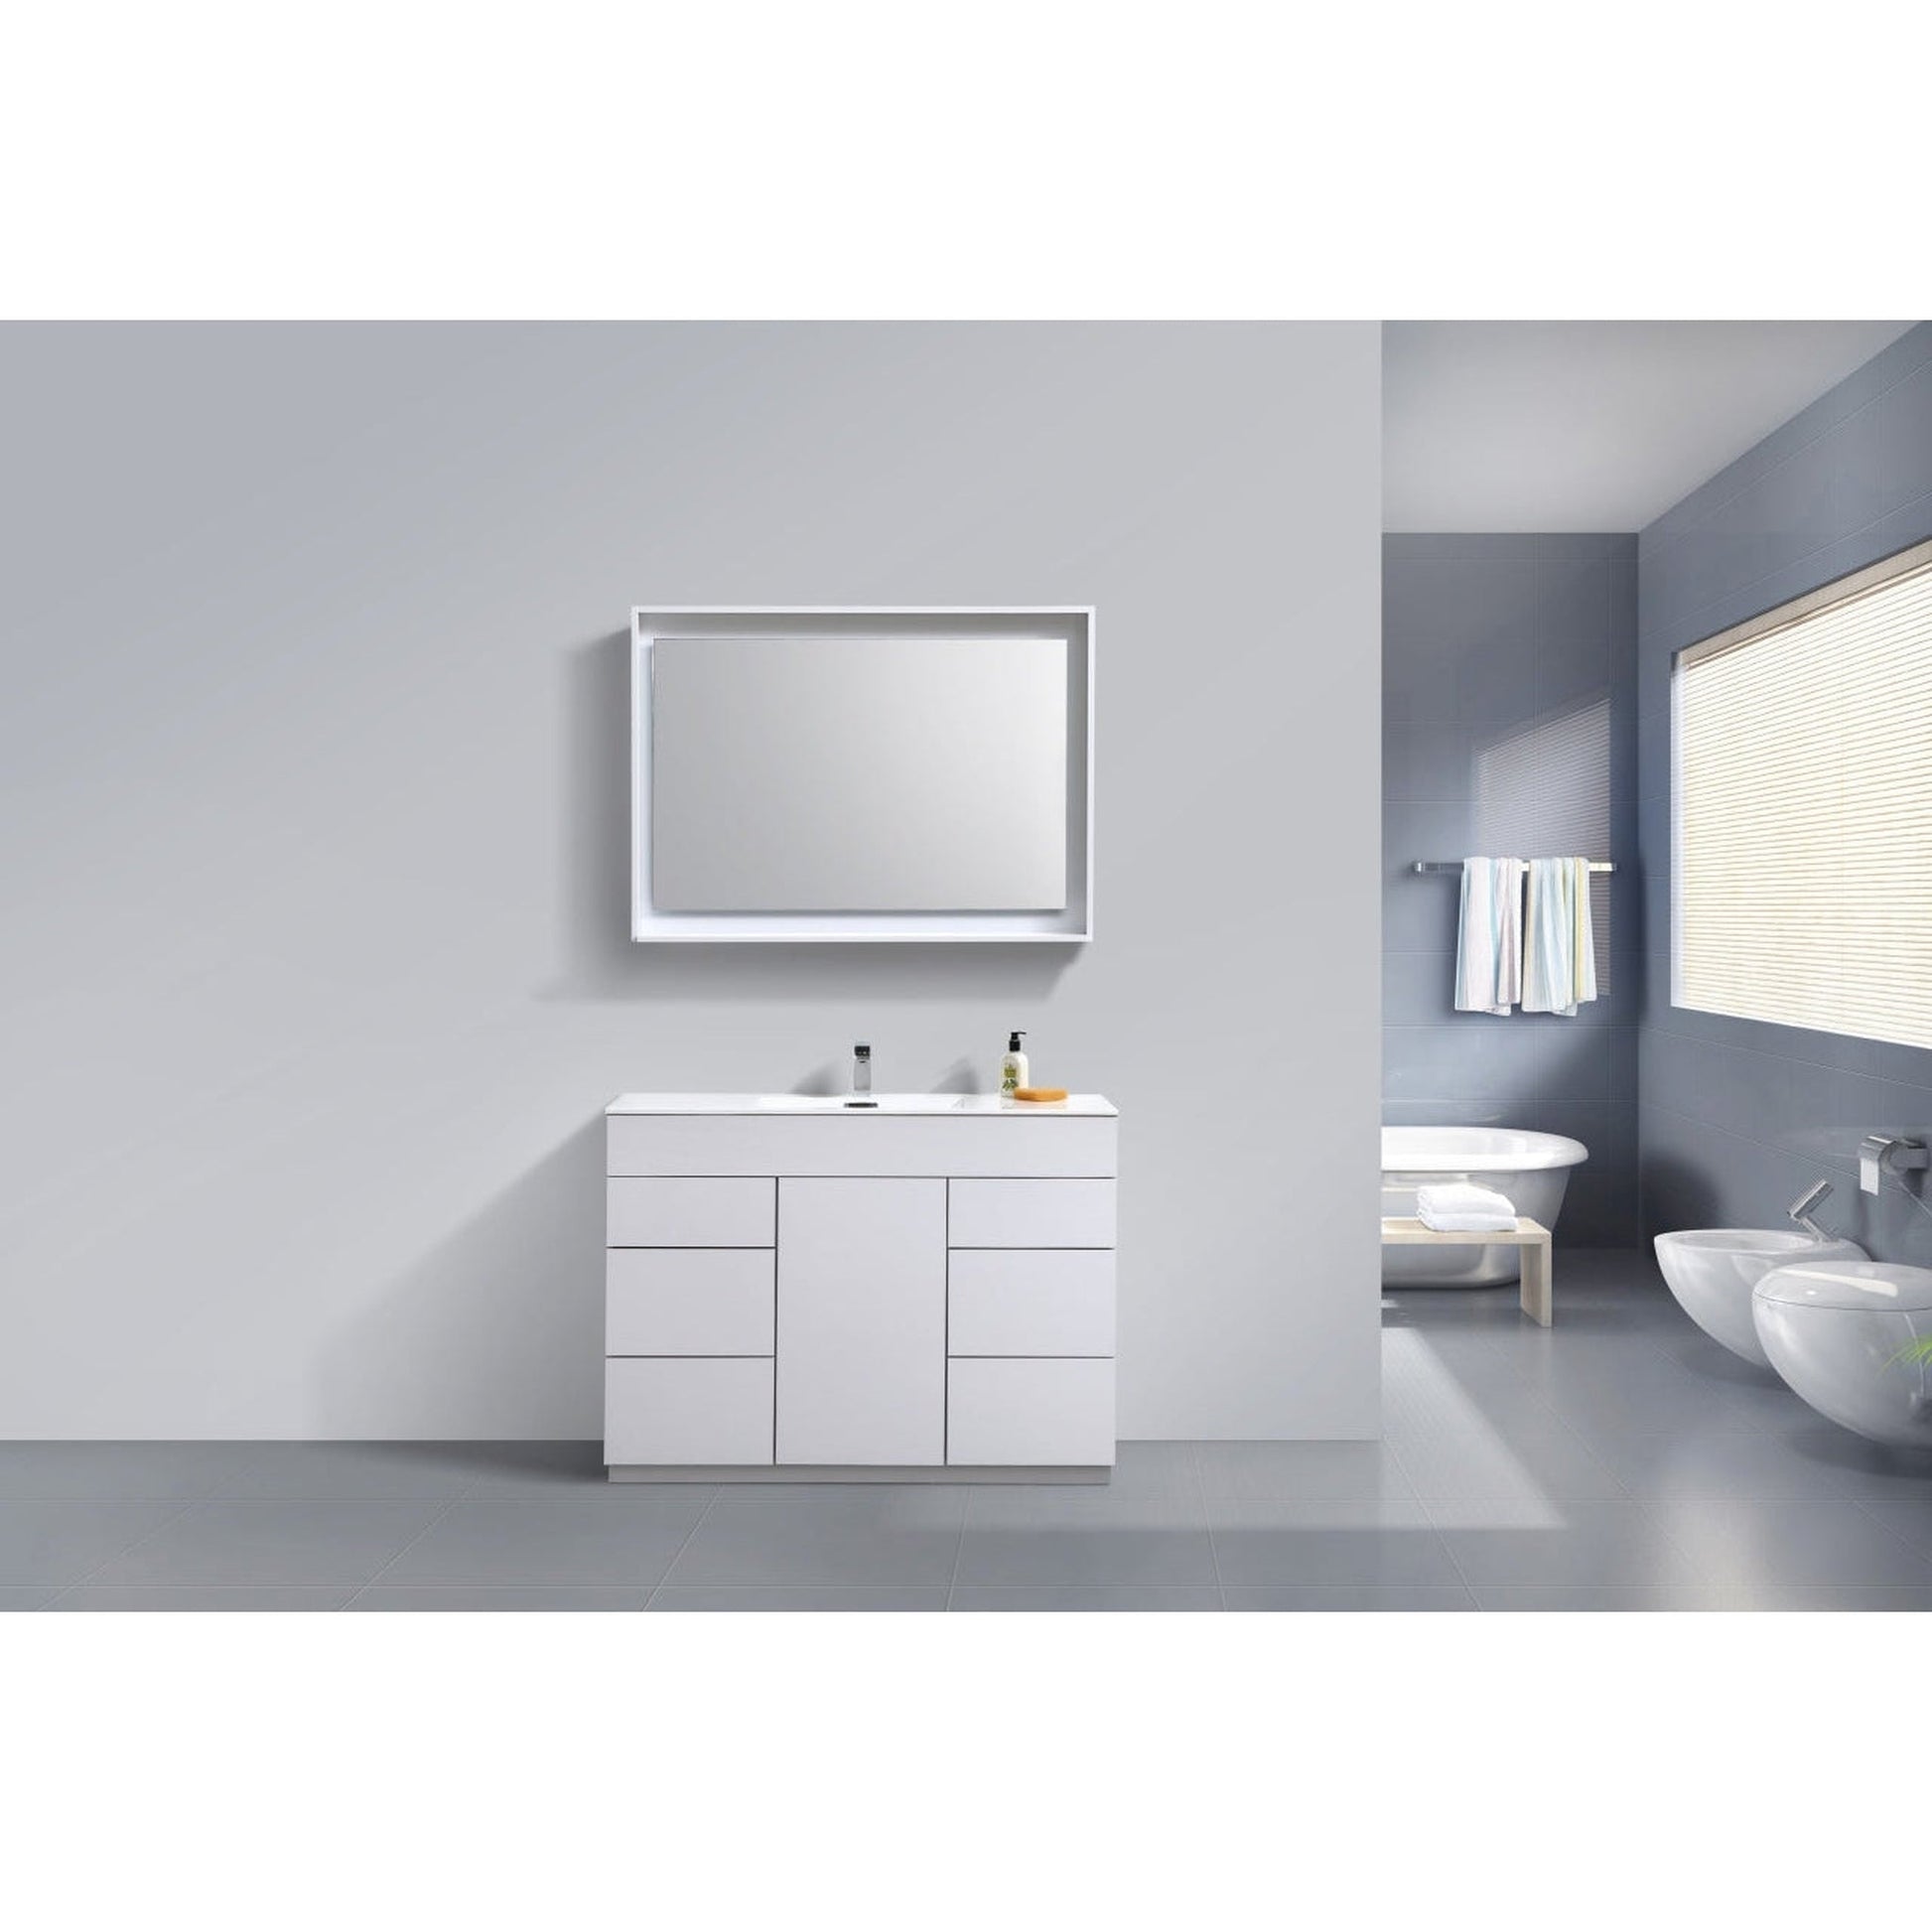 KubeBath Milano 48" High Gloss White Freestanding Modern Bathroom Vanity With Single Integrated Acrylic Sink With Overflow and 48" White Framed Mirror With Shelf